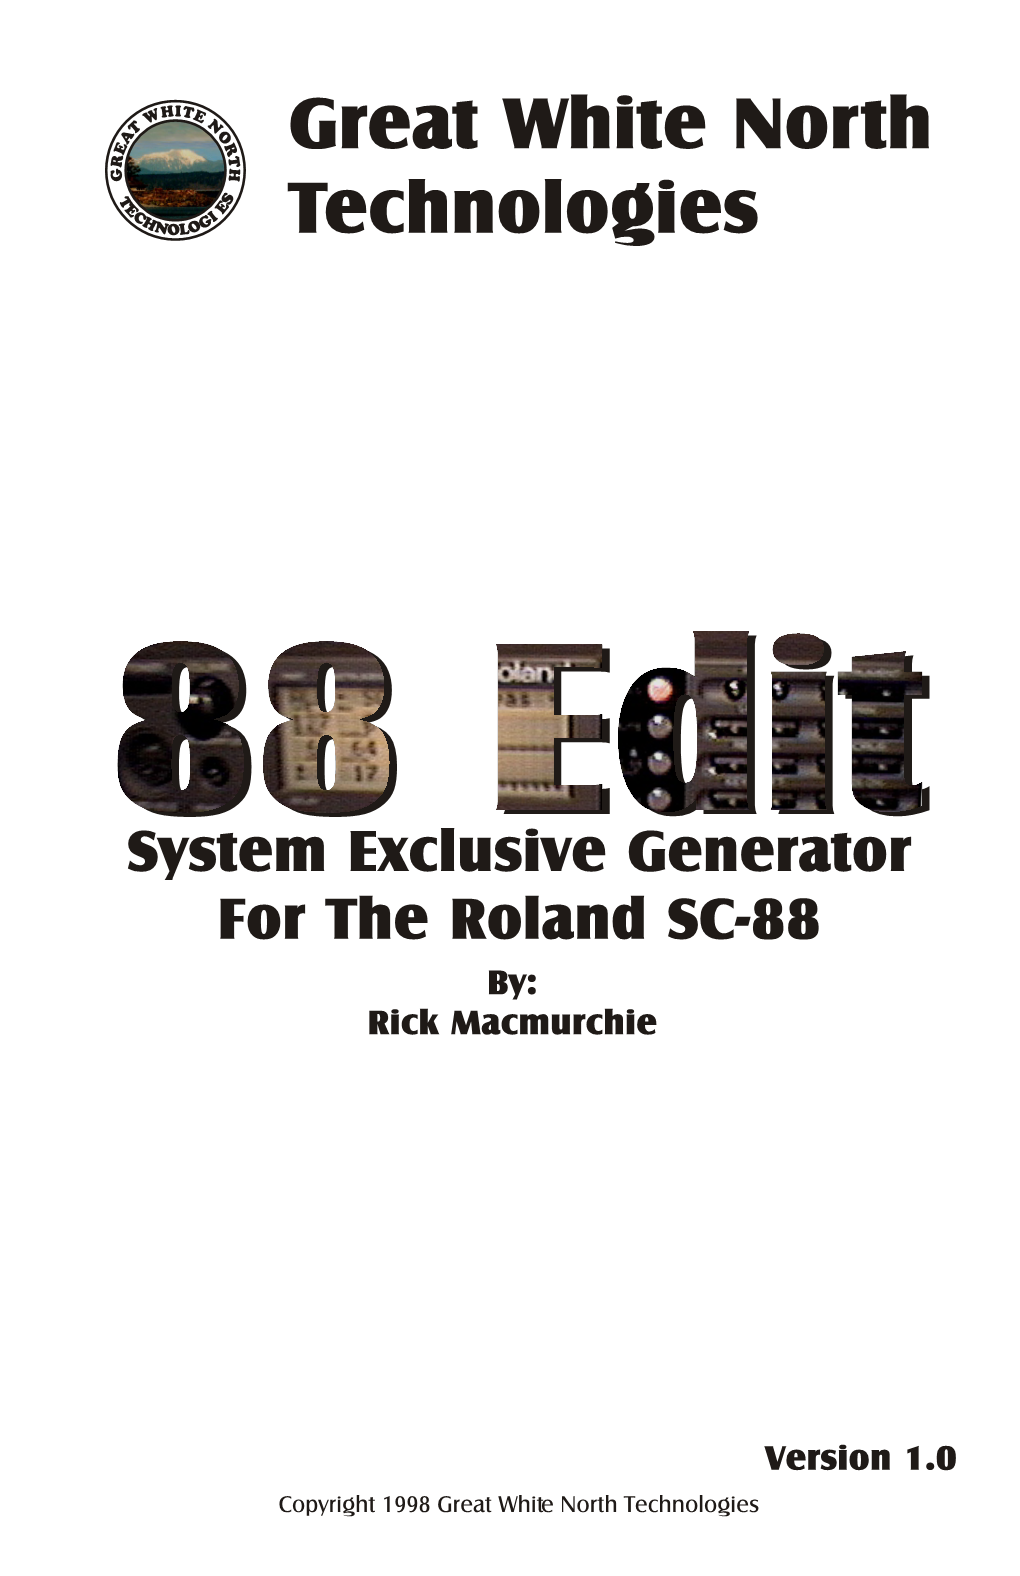 System Exclusive Generator for the Roland SC-88 By: Rick Macmurchie